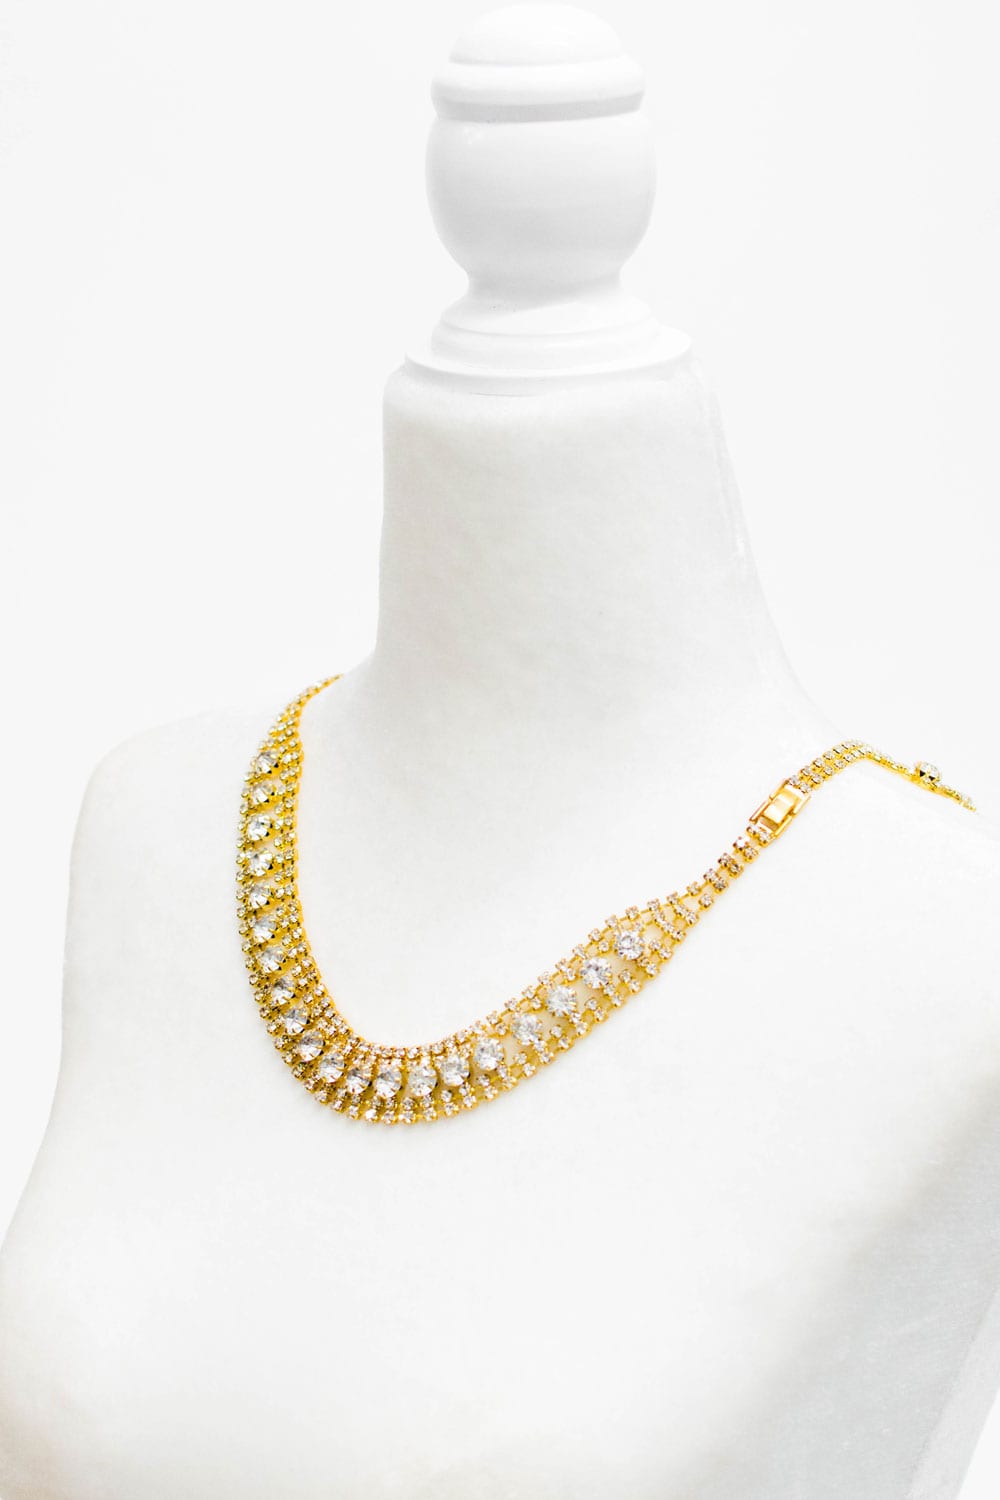 Large Gold Necklace for Backless dRess